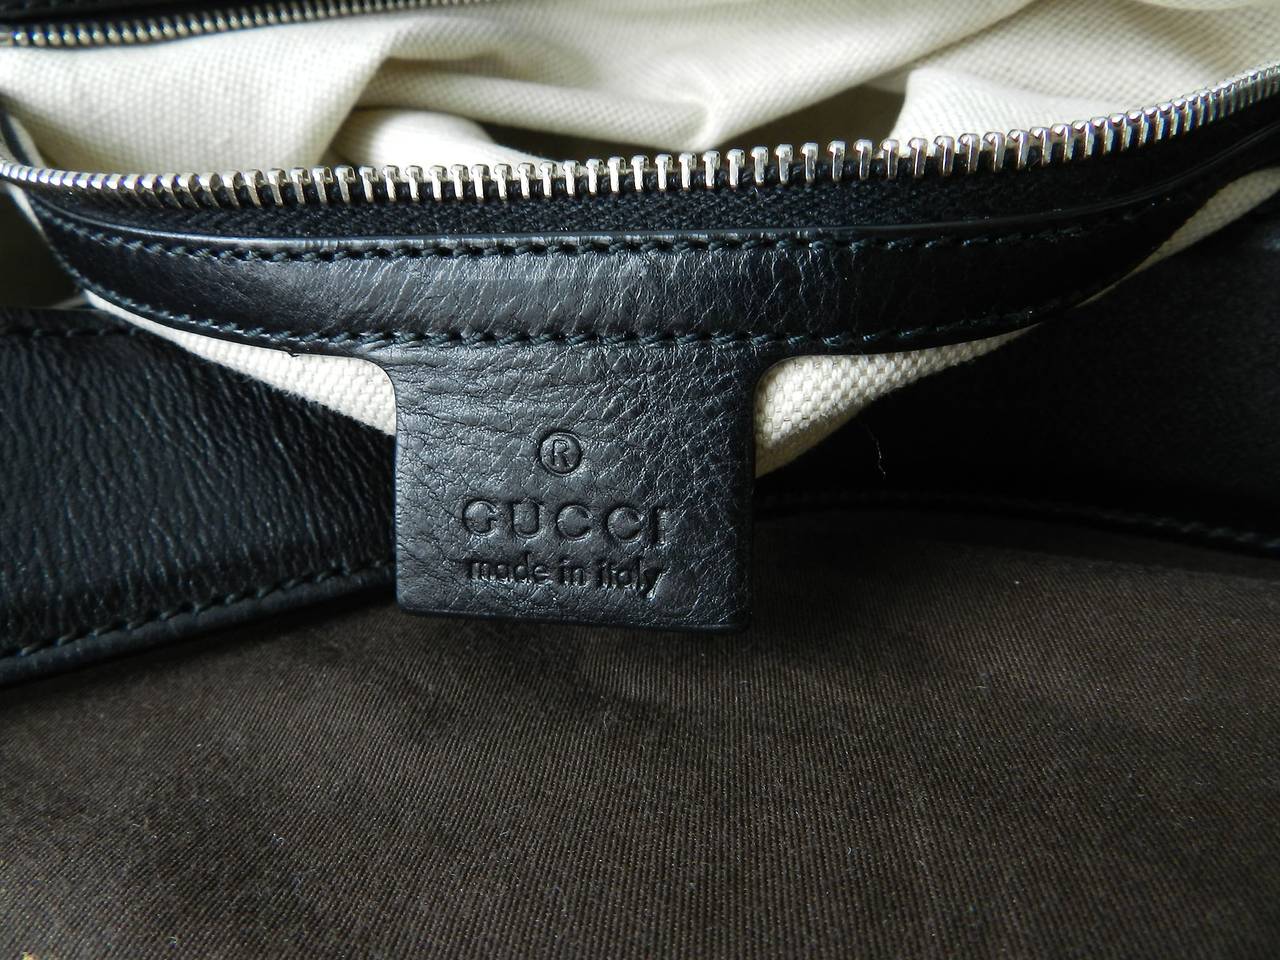 Gucci Ribot Horse Buckle Black Leather Hobo Bag 2